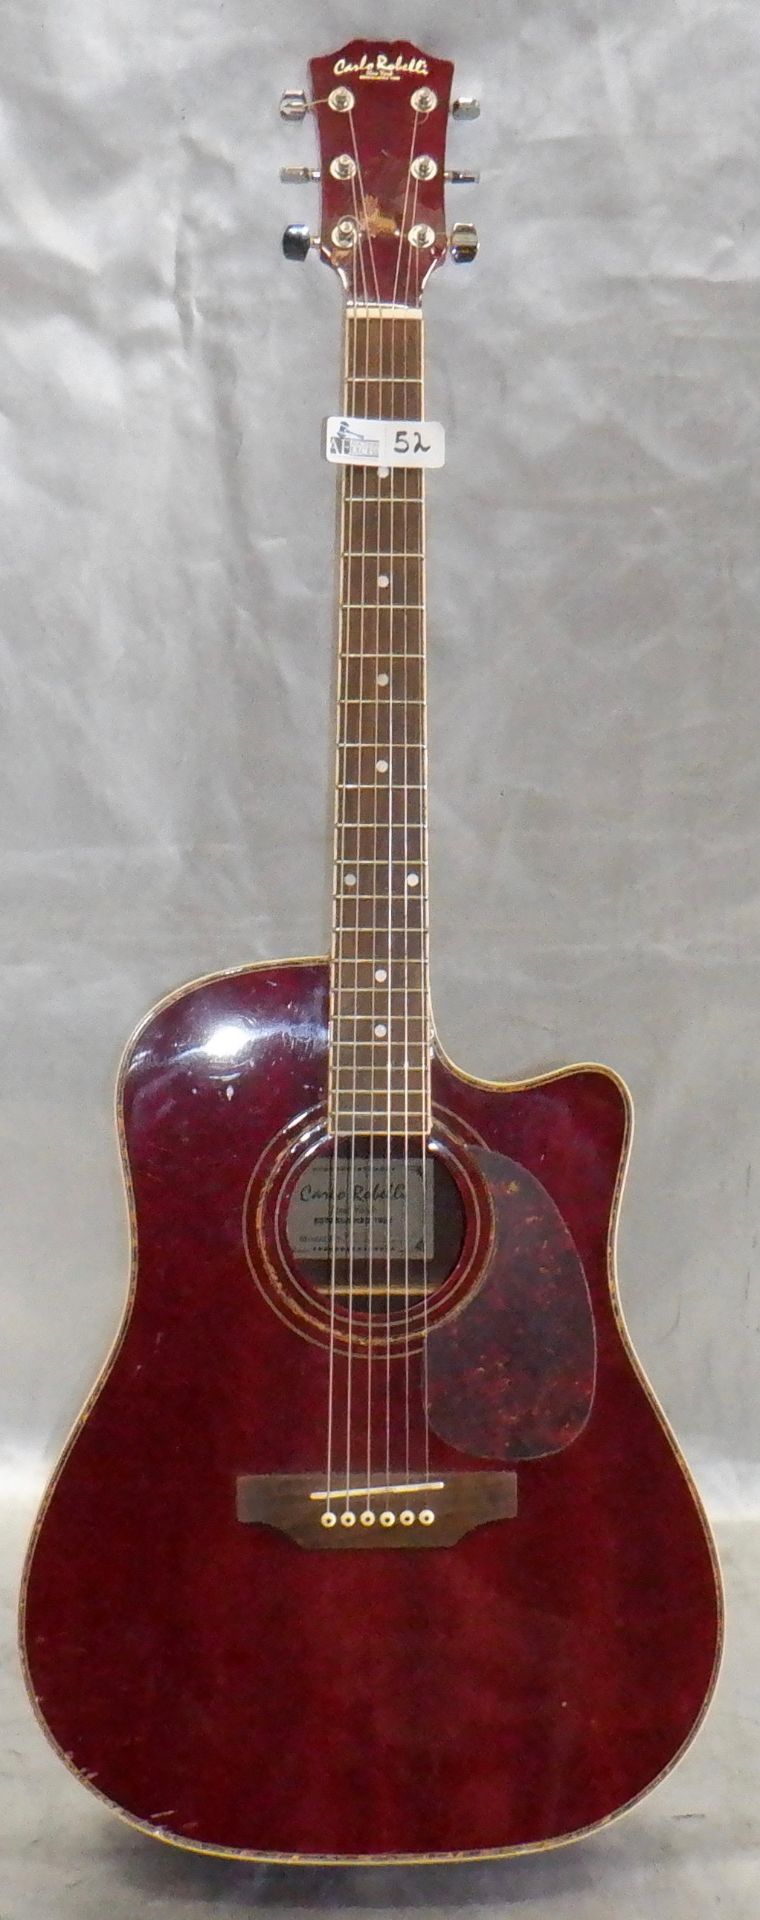 CARLO ROBELLI ACOUSTIC GUITAR WITH CASE - Image 4 of 7